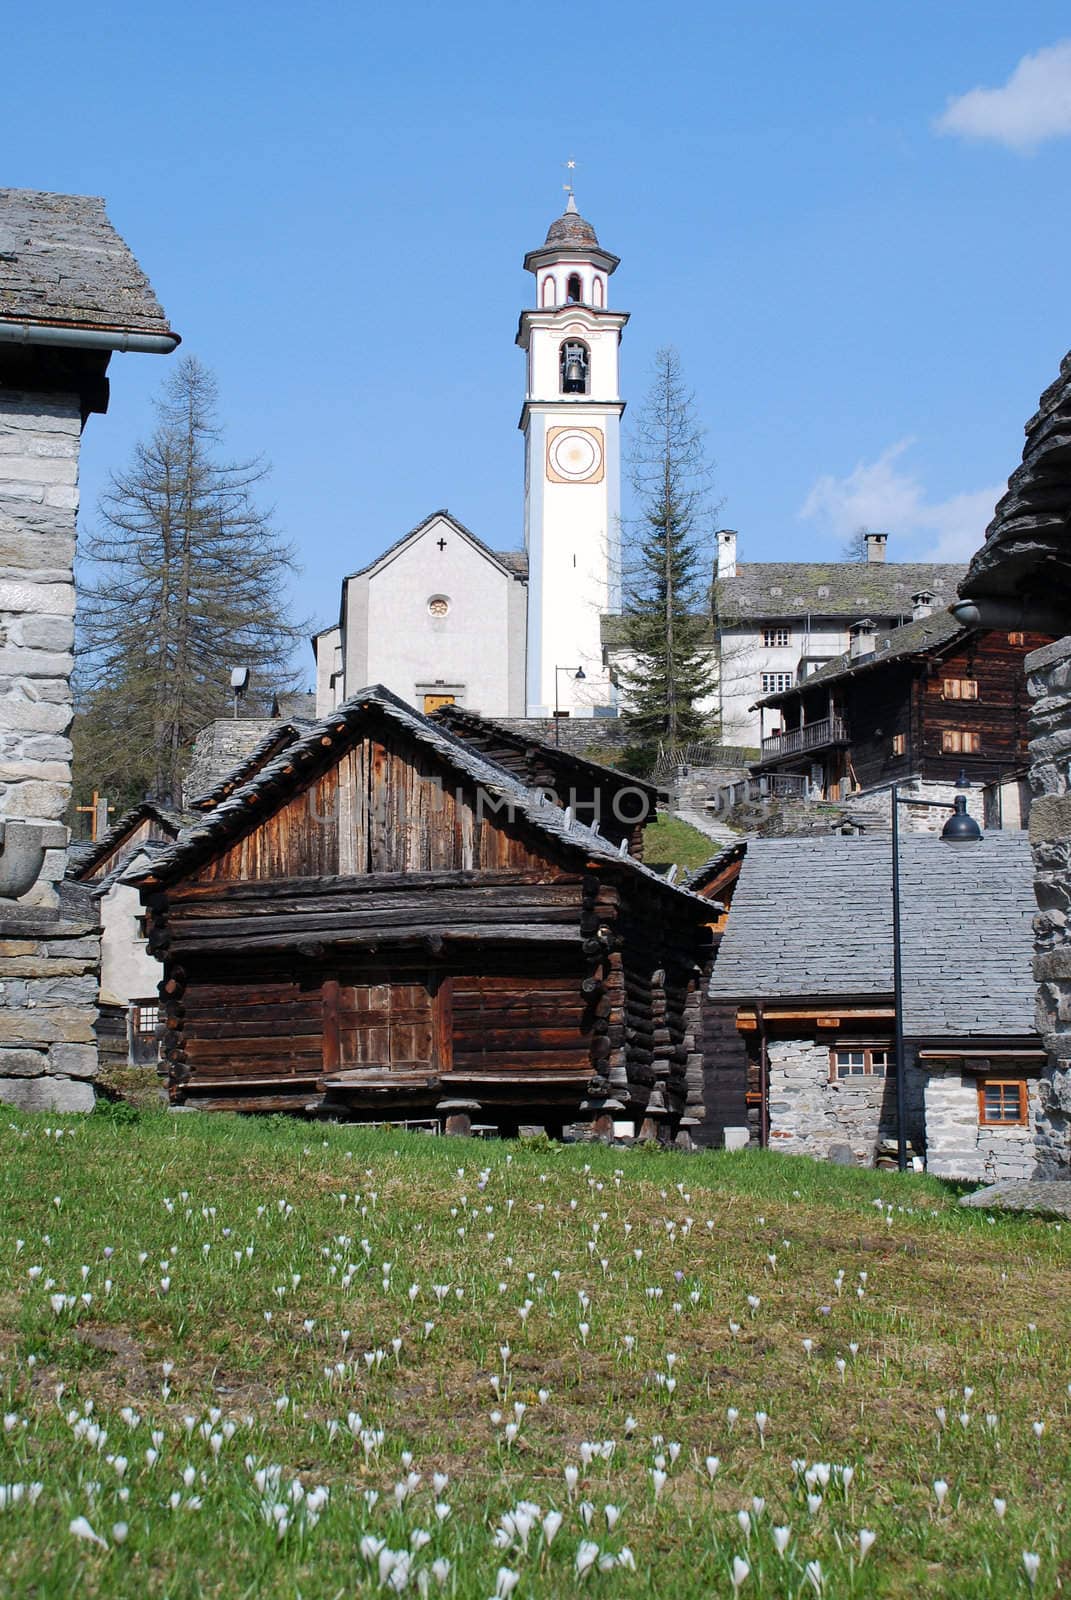 Bosco Gurin retains the charm of one of the most charming mountain villages of Switzerland. The picturesque town, founded in 1253 by settlers Walser actually looks beautiful and intact with its distinctive stone and wooden houses and the church, springtime